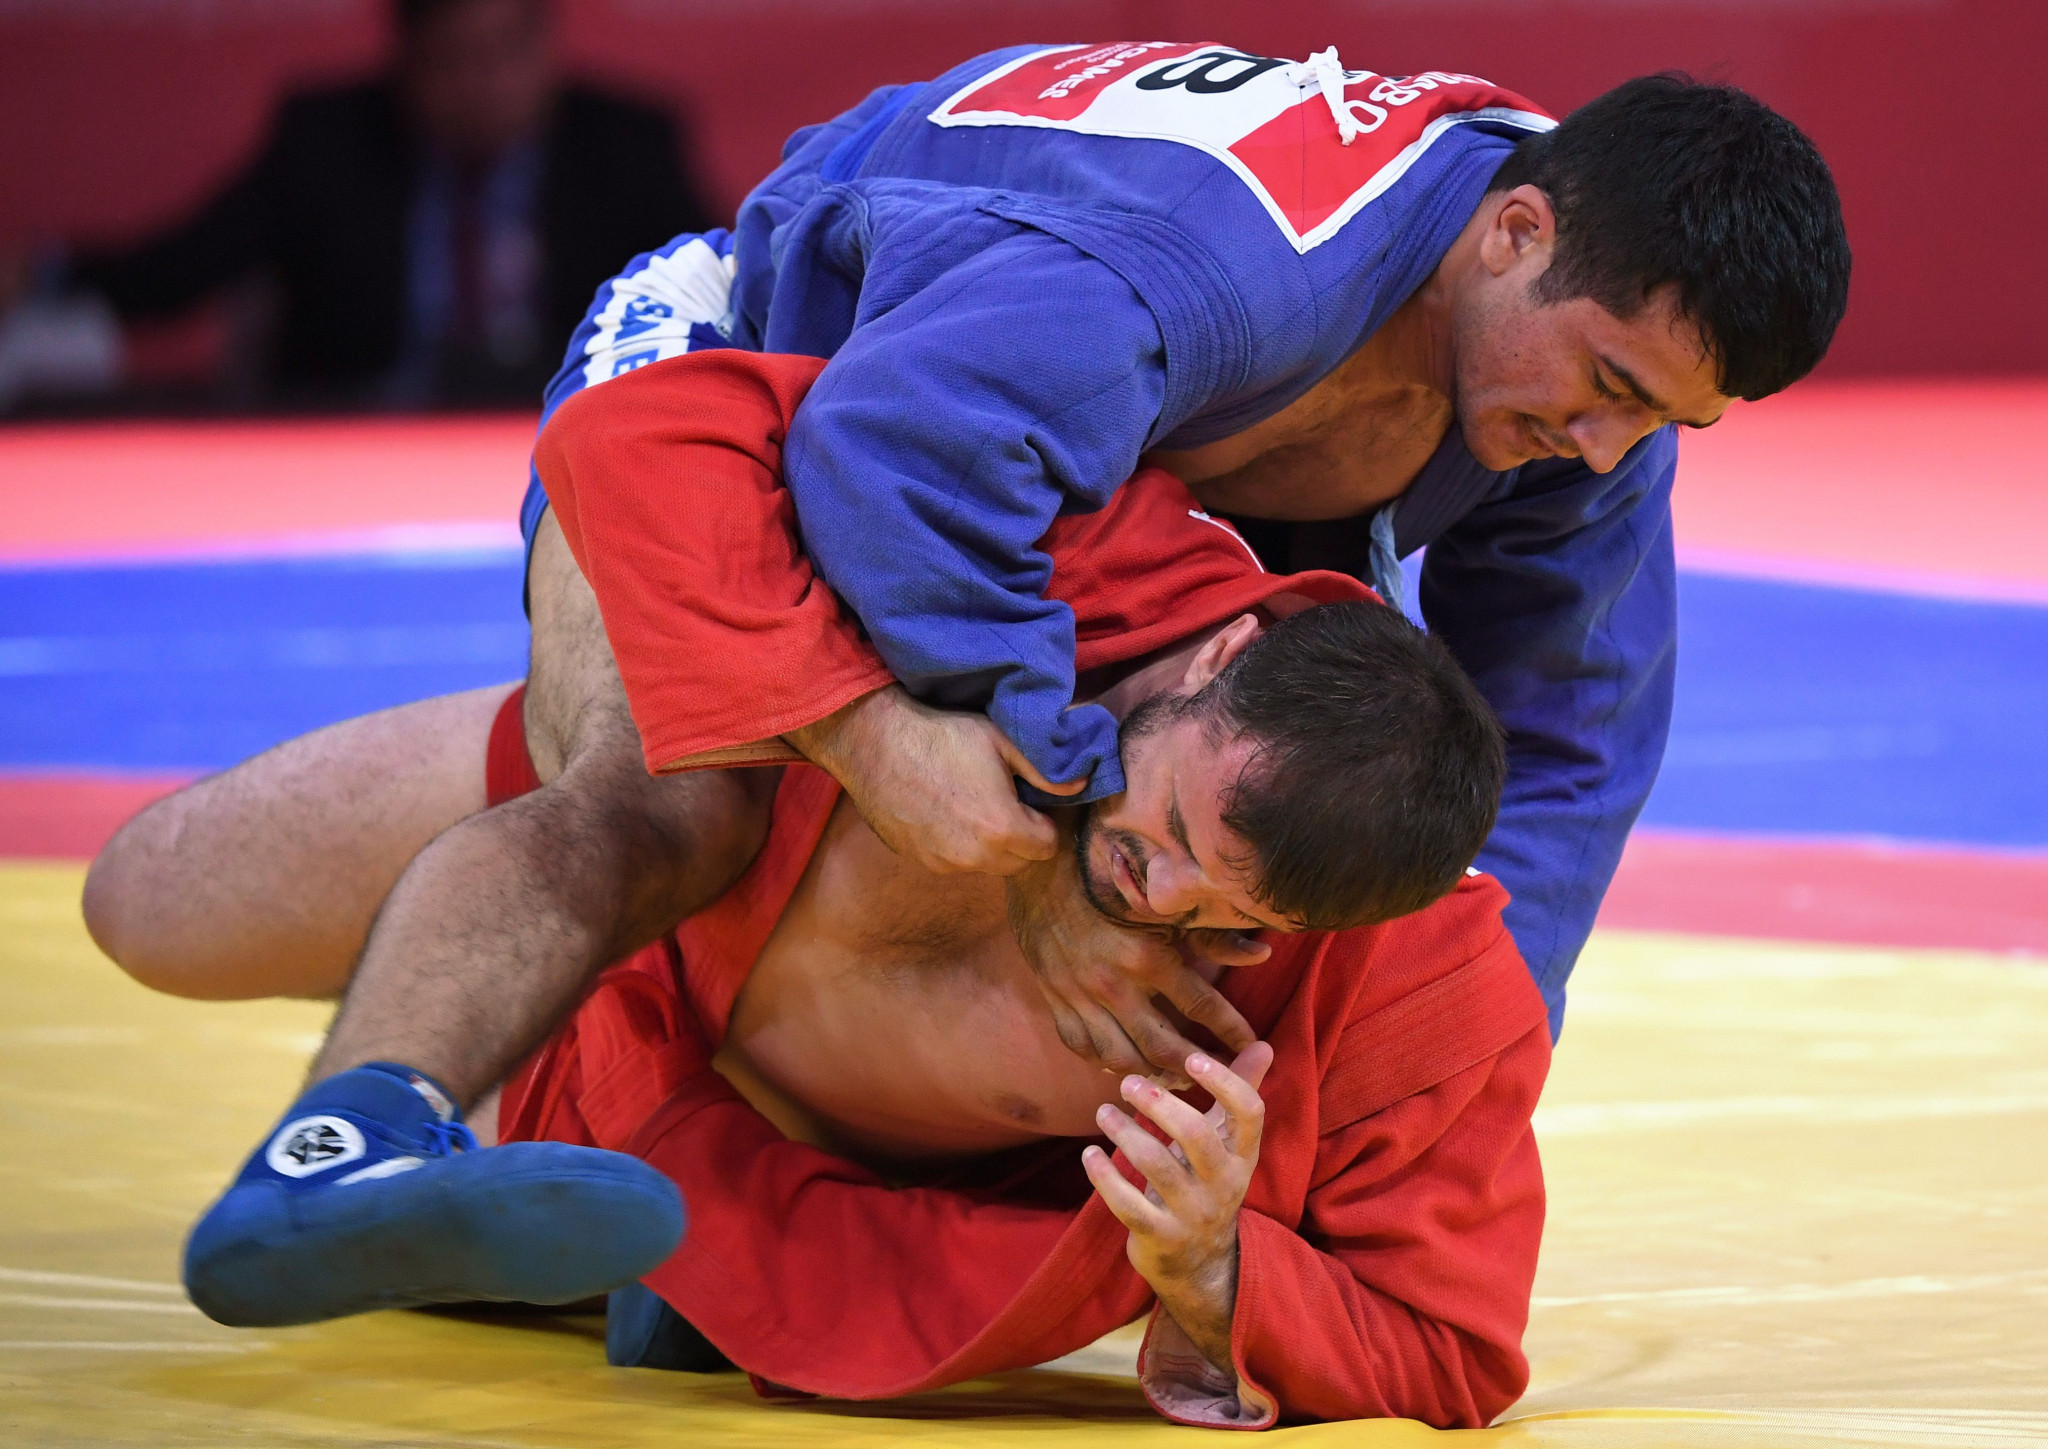 Turkmenistan can now prepare for international sambo competitions in 2019 ©Getty Images